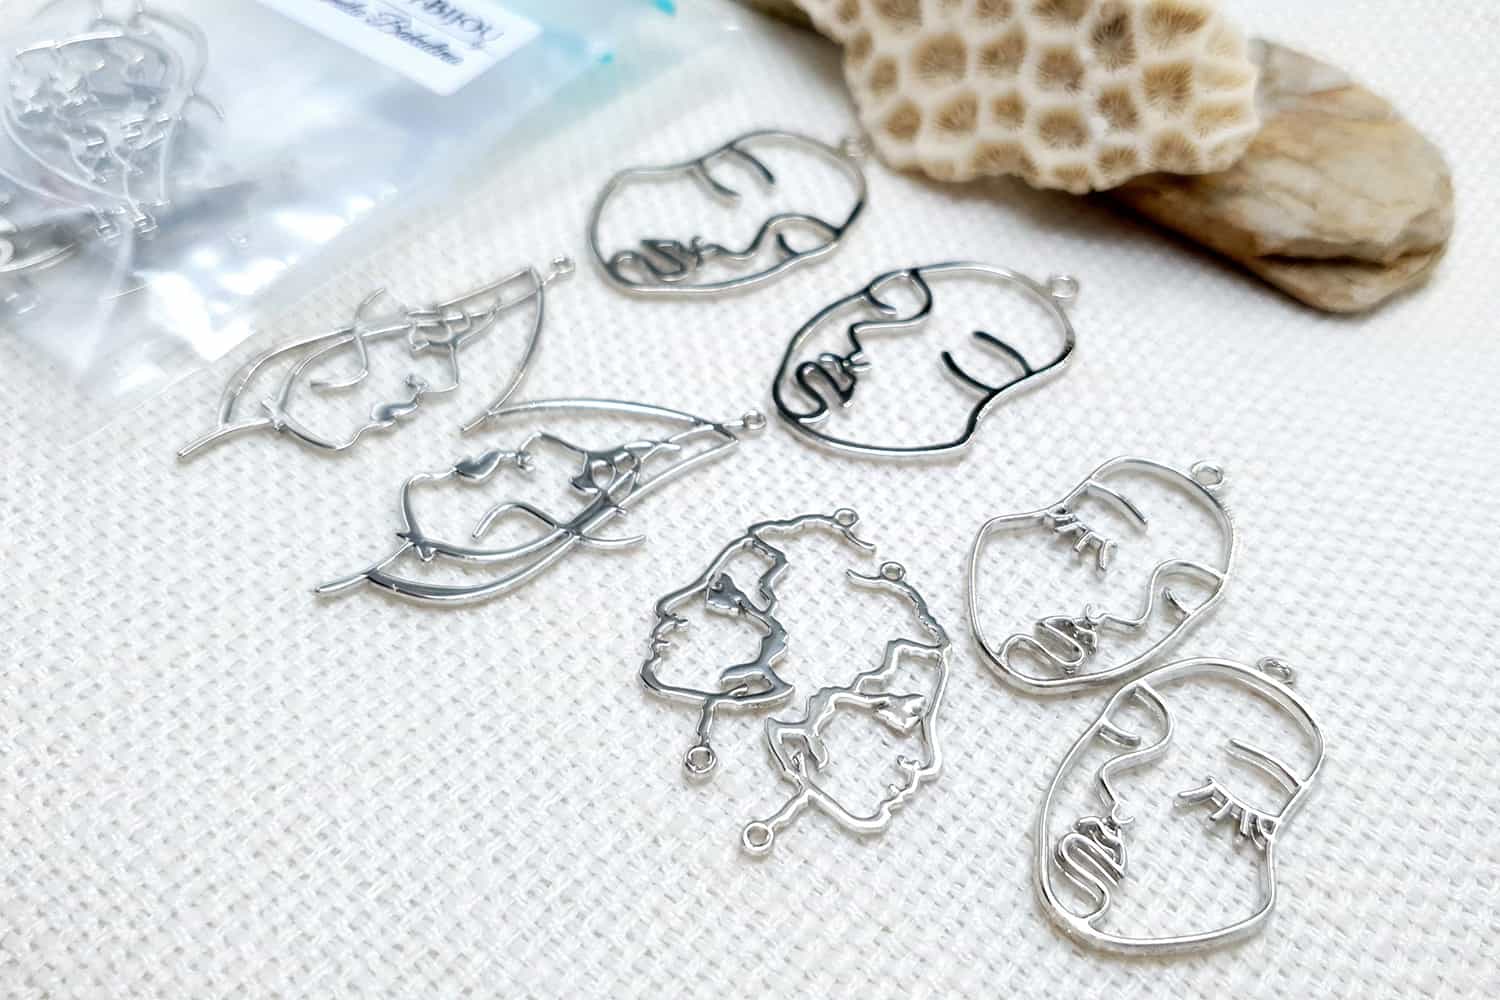 Faces - Set of 8pcs Silver Color Metal Jewelry Findings (22390)